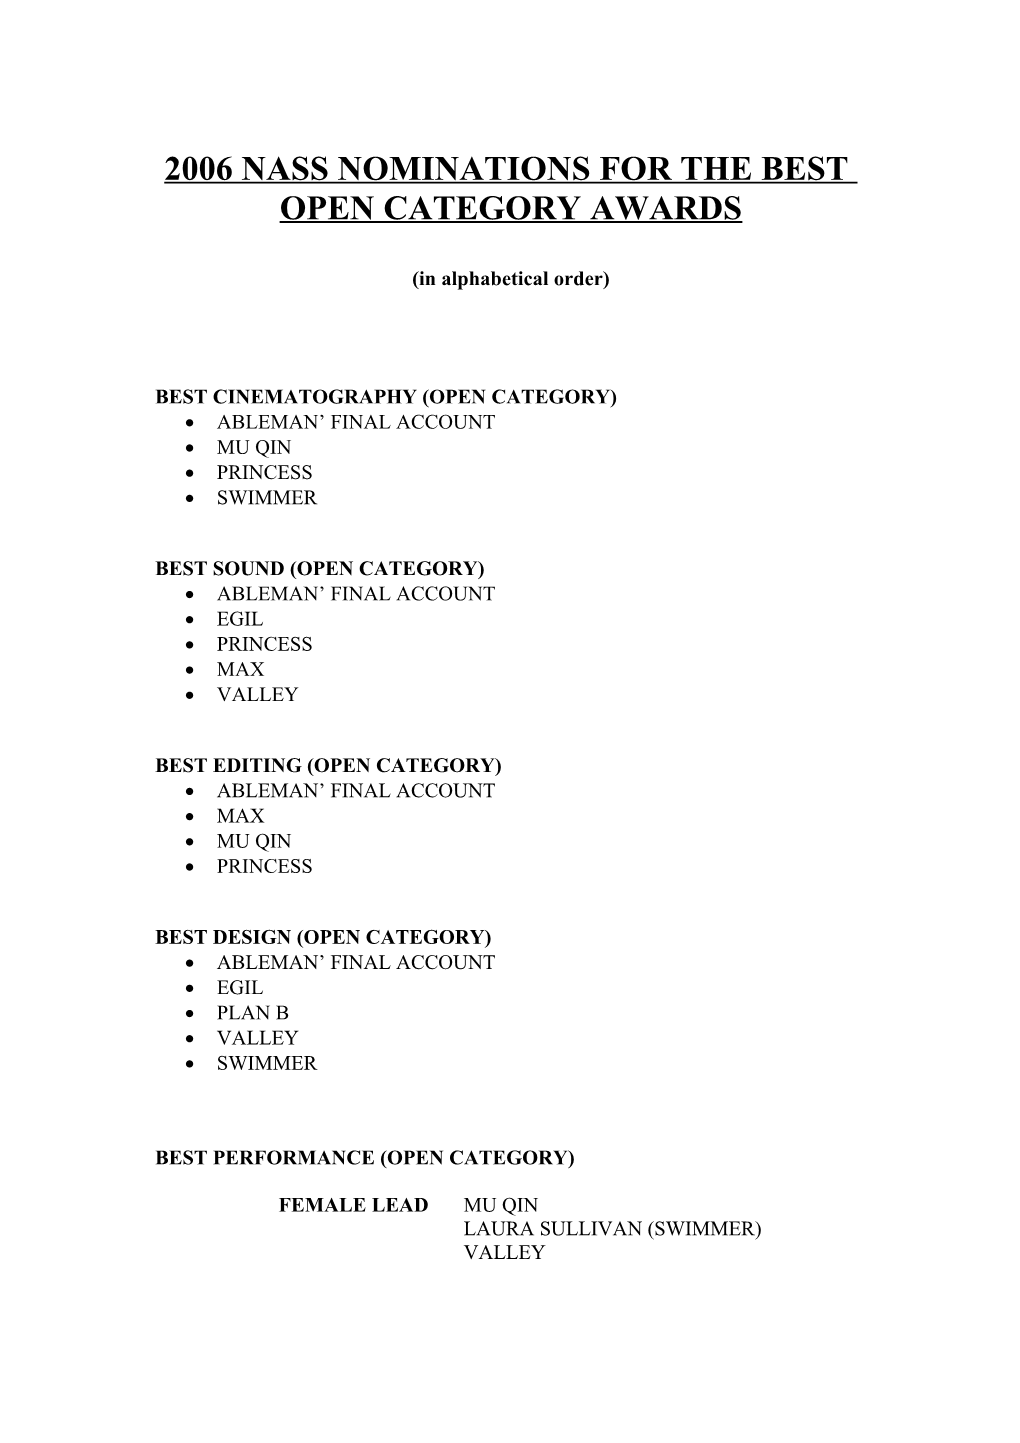 Preliminary Nomination List for 2Nd and 3Rd Year Productions Only in Alphabetical Order